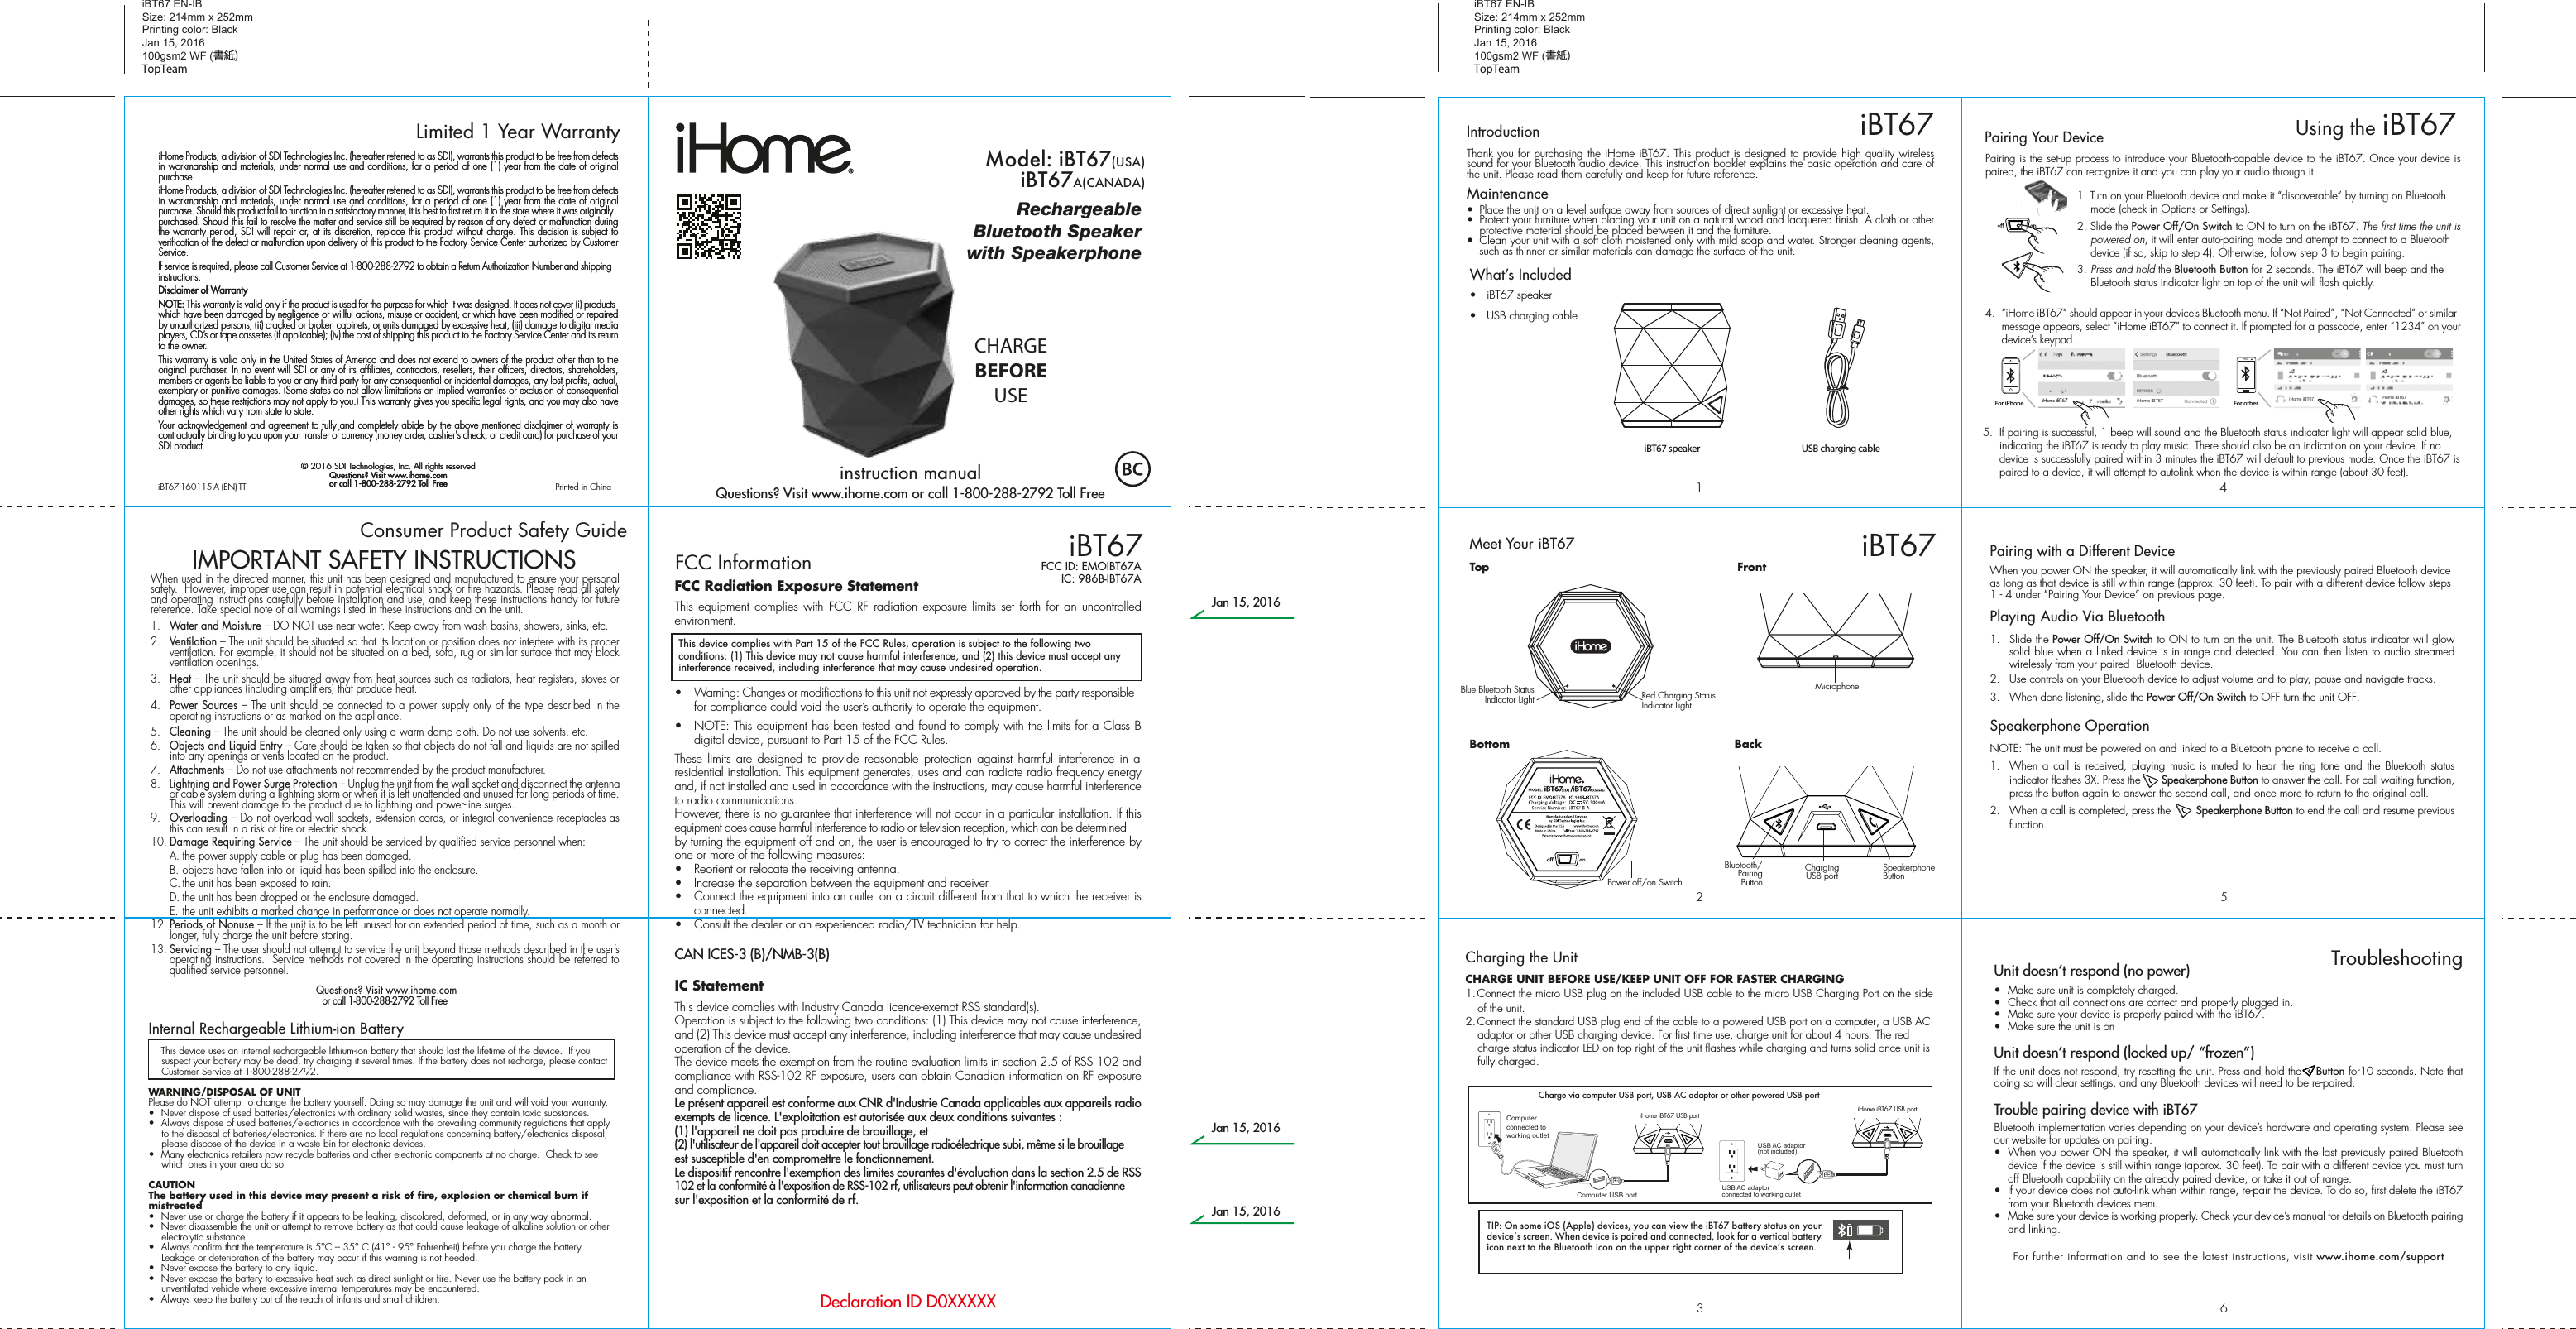 iHome Products, a division of SDI Technologies Inc. (hereafter referred to as SDI), warrants this product to be free from defects in workmanship and materials, under normal use and conditions, for a period of one (1) year from the date of original purchase.iHome Products, a division of SDI Technologies Inc. (hereafter referred to as SDI), warrants this product to be free from defects in workmanship and materials, under normal use and conditions, for a period of one (1) year from the date of original purchase. Should this product fail to function in a satisfactory manner, it is best to first return it to the store where it was originally purchased. Should this fail to resolve the matter and service still be required by reason of any defect or malfunction during the warranty period, SDI will repair or, at its discretion, replace this product without charge. This decision is subject to verification of the defect or malfunction upon delivery of this product to the Factory Service Center authorized by Customer Service.If service is required, please call Customer Service at 1-800-288-2792 to obtain a Return Authorization Number and shipping instructions. Disclaimer of WarrantyNOTE: This warranty is valid only if the product is used for the purpose for which it was designed. It does not cover (i) products which have been damaged by negligence or willful actions, misuse or accident, or which have been modified or repaired by unauthorized persons; (ii) cracked or broken cabinets, or units damaged by excessive heat; (iii) damage to digital media players, CD’s or tape cassettes (if applicable); (iv) the cost of shipping this product to the Factory Service Center and its return to the owner.This warranty is valid only in the United States of America and does not extend to owners of the product other than to the original purchaser. In no event will SDI or any of its affiliates, contractors, resellers, their officers, directors, shareholders, members or agents be liable to you or any third party for any consequential or incidental damages, any lost profits, actual, exemplary or punitive damages. (Some states do not allow limitations on implied warranties or exclusion of consequential damages, so these restrictions may not apply to you.) This warranty gives you specific legal rights, and you may also have other rights which vary from state to state.Your acknowledgement and agreement to fully and completely abide by the above mentioned disclaimer of warranty is contractually binding to you upon your transfer of currency (money order, cashier&apos;s check, or credit card) for purchase of your SDI product.© 2016 SDI Technologies, Inc. All rights reservedQuestions? Visit www.ihome.comor call 1-800-288-2792 Toll FreeiHome Products, a division of SDI Technologies Inc. (hereafter referred to as SDI), warrants this product to be free from defects in workmanship and materials, under normal use and conditions, for a period of one (1) year from the date of original purchase.iHome Products, a division of SDI Technologies Inc. (hereafter referred to as SDI), warrants this product to be free from defects in workmanship and materials, under normal use and conditions, for a period of one (1) year from the date of original purchase. Should this product fail to function in a satisfactory manner, it is best to first return it to the store where it was originally purchased. Should this fail to resolve the matter and service still be required by reason of any defect or malfunction during the warranty period, SDI will repair or, at its discretion, replace this product without charge. This decision is subject to verification of the defect or malfunction upon delivery of this product to the Factory Service Center authorized by Customer Service.If service is required, please call Customer Service at 1-800-288-2792 to obtain a Return Authorization Number and shipping instructions. Disclaimer of WarrantyNOTE: This warranty is valid only if the product is used for the purpose for which it was designed. It does not cover (i) products which have been damaged by negligence or willful actions, misuse or accident, or which have been modified or repaired by unauthorized persons; (ii) cracked or broken cabinets, or units damaged by excessive heat; (iii) damage to digital media players, CD’s or tape cassettes (if applicable); (iv) the cost of shipping this product to the Factory Service Center and its return to the owner.This warranty is valid only in the United States of America and does not extend to owners of the product other than to the original purchaser. In no event will SDI or any of its affiliates, contractors, resellers, their officers, directors, shareholders, members or agents be liable to you or any third party for any consequential or incidental damages, any lost profits, actual, exemplary or punitive damages. (Some states do not allow limitations on implied warranties or exclusion of consequential damages, so these restrictions may not apply to you.) This warranty gives you specific legal rights, and you may also have other rights which vary from state to state.Your acknowledgement and agreement to fully and completely abide by the above mentioned disclaimer of warranty is contractually binding to you upon your transfer of currency (money order, cashier&apos;s check, or credit card) for purchase of your SDI product.© 2016 SDI Technologies, Inc. All rights reservedQuestions? Visit www.ihome.comor call 1-800-288-2792 Toll FreeLimited 1 Year WarrantyiBT67 EN-IB Size: 214mm x 252mmPrinting color: BlackJan 15, 2016100gsm2 WF (書紙)TopTeamiBT67 EN-IB Size: 214mm x 252mmPrinting color: BlackJan 15, 2016100gsm2 WF (書紙)TopTeamConsumer Product Safety Guide8When used in the directed manner, this unit has been designed and manufactured to ensure your personal safety.  However, improper use can result in potential electrical shock or fire hazards. Please read all safety and operating instructions carefully before installation and use, and keep these instructions handy for future reference. Take special note of all warnings listed in these instructions and on the unit. 1.   Water and Moisture – DO NOT use near water. Keep away from wash basins, showers, sinks, etc.2.   Ventilation – The unit should be situated so that its location or position does not interfere with its proper ventilation. For example, it should not be situated on a bed, sofa, rug or similar surface that may block ventilation openings.  3.   Heat – The unit should be situated away from heat sources such as radiators, heat registers, stoves or other appliances (including amplifiers) that produce heat.4.   Power Sources – The unit should be connected to a power supply only of the type described in the operating instructions or as marked on the appliance.5.   Cleaning – The unit should be cleaned only using a warm damp cloth. Do not use solvents, etc.  6.   Objects and Liquid Entry – Care should be taken so that objects do not fall and liquids are not spilled into any openings or vents located on the product.7.   Attachments – Do not use attachments not recommended by the product manufacturer.8.   Lightning and Power Surge Protection – Unplug the unit from the wall socket and disconnect the antenna or cable system during a lightning storm or when it is left unattended and unused for long periods of time. This will prevent damage to the product due to lightning and power-line surges.9.  Overloading – Do not overload wall sockets, extension cords, or integral convenience receptacles as this can result in a risk of fire or electric shock.10. Damage Requiring Service – The unit should be serviced by qualified service personnel when:  A. the power supply cable or plug has been damaged.  B. objects have fallen into or liquid has been spilled into the enclosure.  C. the unit has been exposed to rain.  D. the unit has been dropped or the enclosure damaged.  E. the unit exhibits a marked change in performance or does not operate normally.12. Periods of Nonuse – If the unit is to be left unused for an extended period of time, such as a month or longer, fully charge the unit before storing.13. Servicing – The user should not attempt to service the unit beyond those methods described in the user’s operating instructions.  Service methods not covered in the operating instructions should be referred to qualified service personnel. Questions? Visit www.ihome.comor call 1-800-288-2792 Toll FreeIMPORTANT SAFETY INSTRUCTIONSInternal Rechargeable Lithium-ion Battery   This device uses an internal rechargeable lithium-ion battery that should last the lifetime of the device.  If you suspect your battery may be dead, try charging it several times. If the battery does not recharge, please contact Customer Service at 1-800-288-2792. WARNING/DISPOSAL OF UNITPlease do NOT attempt to change the battery yourself. Doing so may damage the unit and will void your warranty.•  Never dispose of used batteries/electronics with ordinary solid wastes, since they contain toxic substances. •  Always dispose of used batteries/electronics in accordance with the prevailing community regulations that apply to the disposal of batteries/electronics. If there are no local regulations concerning battery/electronics disposal, please dispose of the device in a waste bin for electronic devices.•  Many electronics retailers now recycle batteries and other electronic components at no charge.  Check to see which ones in your area do so.CAUTIONThe battery used in this device may present a risk of fire, explosion or chemical burn if mistreated•  Never use or charge the battery if it appears to be leaking, discolored, deformed, or in any way abnormal.•  Never disassemble the unit or attempt to remove battery as that could cause leakage of alkaline solution or other electrolytic substance.•  Always confirm that the temperature is 5°C – 35° C (41° - 95° Fahrenheit) before you charge the battery. Leakage or deterioration of the battery may occur if this warning is not heeded.•  Never expose the battery to any liquid.•  Never expose the battery to excessive heat such as direct sunlight or fire. Never use the battery pack in an unventilated vehicle where excessive internal temperatures may be encountered.•  Always keep the battery out of the reach of infants and small children.iBT67-160115-A (EN)-TT                                             Printed in ChinaFCC Radiation Exposure StatementThis equipment complies with FCC RF radiation exposure limits set forth for an uncontrolled environment. •  Warning: Changes or modifications to this unit not expressly approved by the party responsible for compliance could void the user’s authority to operate the equipment.•  NOTE: This equipment has been tested and found to comply with the limits for a Class B digital device, pursuant to Part 15 of the FCC Rules.These limits are designed to provide reasonable protection against harmful interference in a residential installation. This equipment generates, uses and can radiate radio frequency energy and, if not installed and used in accordance with the instructions, may cause harmful interference to radio communications.However, there is no guarantee that interference will not occur in a particular installation. If this equipment does cause harmful interference to radio or television reception, which can be determined by turning the equipment off and on, the user is encouraged to try to correct the interference by one or more of the following measures:•  Reorient or relocate the receiving antenna.•  Increase the separation between the equipment and receiver.•  Connect the equipment into an outlet on a circuit different from that to which the receiver is connected.•  Consult the dealer or an experienced radio/TV technician for help.CAN ICES-3 (B)/NMB-3(B)IC StatementThis device complies with Industry Canada licence-exempt RSS standard(s).Operation is subject to the following two conditions: (1) This device may not cause interference, and (2) This device must accept any interference, including interference that may cause undesired operation of the device.The device meets the exemption from the routine evaluation limits in section 2.5 of RSS 102 and compliance with RSS-102 RF exposure, users can obtain Canadian information on RF exposure and compliance.Le présent appareil est conforme aux CNR d&apos;Industrie Canada applicables aux appareils radio exempts de licence. L&apos;exploitation est autorisée aux deux conditions suivantes :(1) l&apos;appareil ne doit pas produire de brouillage, et(2) l&apos;utilisateur de l&apos;appareil doit accepter tout brouillage radioélectrique subi, même si le brouillage est susceptible d&apos;en compromettre le fonctionnement.Le dispositif rencontre l&apos;exemption des limites courantes d&apos;évaluation dans la section 2.5 de RSS 102 et la conformité à l&apos;exposition de RSS-102 rf, utilisateurs peut obtenir l&apos;information canadienne sur l&apos;exposition et la conformité de rf.RechargeableBluetooth Speakerwith SpeakerphoneModel: iBT67(USA)Model: iBT67A(CANADA)CHARGEBEFOREUSEiBT67FCC InformationThis device complies with Part 15 of the FCC Rules, operation is subject to the following two conditions: (1) This device may not cause harmful interference, and (2) this device must accept any interference received, including interference that may cause undesired operation.FCC ID: EMOIBT67AIC: 986B-IBT67ADeclaration ID D0XXXXXWhat’s Included •  iBT67 speaker•  USB charging cableiBT67 speaker564123iBT67Meet Your iBT67Pairing with a Different DeviceWhen you power ON the speaker, it will automatically link with the previously paired Bluetooth device as long as that device is still within range (approx. 30 feet). To pair with a different device follow steps 1 - 4 under ”Pairing Your Device” on previous page.Playing Audio Via Bluetooth 1. Slide the Power Off/On Switch to ON to turn on the unit. The Bluetooth status indicator will glow solid blue when a linked device is in range and detected. You can then listen to audio streamed wirelessly from your paired  Bluetooth device.2.  Use controls on your Bluetooth device to adjust volume and to play, pause and navigate tracks.  3.  When done listening, slide the Power Off/On Switch to OFF turn the unit OFF. Speakerphone OperationNOTE: The unit must be powered on and linked to a Bluetooth phone to receive a call.1.  When a call is received, playing music is muted to hear the ring tone and the Bluetooth status indicator flashes 3X. Press the       Speakerphone Button to answer the call. For call waiting function, press the button again to answer the second call, and once more to return to the original call.2.  When a call is completed, press the        Speakerphone Button to end the call and resume previous function.Unit doesn’t respond (no power) •  Make sure unit is completely charged. •  Check that all connections are correct and properly plugged in. •  Make sure your device is properly paired with the iBT67.•  Make sure the unit is onUnit doesn’t respond (locked up/ “frozen”)If the unit does not respond, try resetting the unit. Press and hold the    Button for10 seconds. Note that doing so will clear settings, and any Bluetooth devices will need to be re-paired.Trouble pairing device with iBT67Bluetooth implementation varies depending on your device’s hardware and operating system. Please see our website for updates on pairing. •  When you power ON the speaker, it will automatically link with the last previously paired Bluetooth   device if the device is still within range (approx. 30 feet). To pair with a different device you must turn off Bluetooth capability on the already paired device, or take it out of range.•  If your device does not auto-link when within range, re-pair the device. To do so, first delete the iBT67    from your Bluetooth devices menu. •  Make sure your device is working properly. Check your device’s manual for details on Bluetooth pairing and linking. For further information and to see the latest instructions, visit www.ihome.com/supportTroubleshootingUSB charging cableBottomTopRed Charging Status Indicator LightBlue Bluetooth Status Indicator LightBackBluetooth/Pairing ButtonSpeakerphone ButtonChargingUSB portCharging the UnitCHARGE UNIT BEFORE USE/KEEP UNIT OFF FOR FASTER CHARGING1. Connect the micro USB plug on the included USB cable to the micro USB Charging Port on the side of the unit. 2. Connect the standard USB plug end of the cable to a powered USB port on a computer, a USB AC adaptor or other USB charging device. For first time use, charge unit for about 4 hours. The red charge status indicator LED on top right of the unit flashes while charging and turns solid once unit is fully charged.iHome iBT67 USB port iHome iBT67 USB portCharge via computer USB port, USB AC adaptor or other powered USB portComputer USB portComputer connected to working outletUSB AC adaptor(not included)USB AC adaptor connected to working outletPairing is the set-up process to introduce your Bluetooth-capable device to the iBT67. Once your device is paired, the iBT67 can recognize it and you can play your audio through it. 1. Turn on your Bluetooth device and make it “discoverable” by turning on Bluetooth mode (check in Options or Settings).2. Slide the Power Off/On Switch to ON to turn on the iBT67. The first time the unit is powered on, it will enter auto-pairing mode and attempt to connect to a Bluetooth device (if so, skip to step 4). Otherwise, follow step 3 to begin pairing.3.  Press and hold the Bluetooth Button for 2 seconds. The iBT67 will beep and the Bluetooth status indicator light on top of the unit will flash quickly. 4.  “iHome iBT67” should appear in your device’s Bluetooth menu. If “Not Paired”, “Not Connected” or similar message appears, select “iHome iBT67” to connect it. If prompted for a passcode, enter “1234” on your device’s keypad.Using the iBT67iBT675.  If pairing is successful, 1 beep will sound and the Bluetooth status indicator light will appear solid blue, indicating the iBT67 is ready to play music. There should also be an indication on your device. If no device is successfully paired within 3 minutes the iBT67 will default to previous mode. Once the iBT67 is paired to a device, it will attempt to autolink when the device is within range (about 30 feet). Pairing Your Device  For iPhoneiHome iBT67 iHome iBT67iHome iBT67 iHome iBT67For otherFrontMicrophoneTIP: On some iOS (Apple) devices, you can view the iBT67 battery status on your deviceʼs screen. When device is paired and connected, look for a vertical battery icon next to the Bluetooth icon on the upper right corner of the deviceʼs screen.Thank you for purchasing the iHome iBT67. This product is designed to provide high quality wireless sound for your Bluetooth audio device. This instruction booklet explains the basic operation and care of the unit. Please read them carefully and keep for future reference.Maintenance•  Place the unit on a level surface away from sources of direct sunlight or excessive heat.•  Protect your furniture when placing your unit on a natural wood and lacquered finish. A cloth or other protective material should be placed between it and the furniture.•  Clean your unit with a soft cloth moistened only with mild soap and water. Stronger cleaning agents, such as thinner or similar materials can damage the surface of the unit.IntroductionPower off/on Switchinstruction manualQuestions? Visit www.ihome.com or call 1-800-288-2792 Toll FreeJan 15, 2016Jan 15, 2016Jan 15, 2016